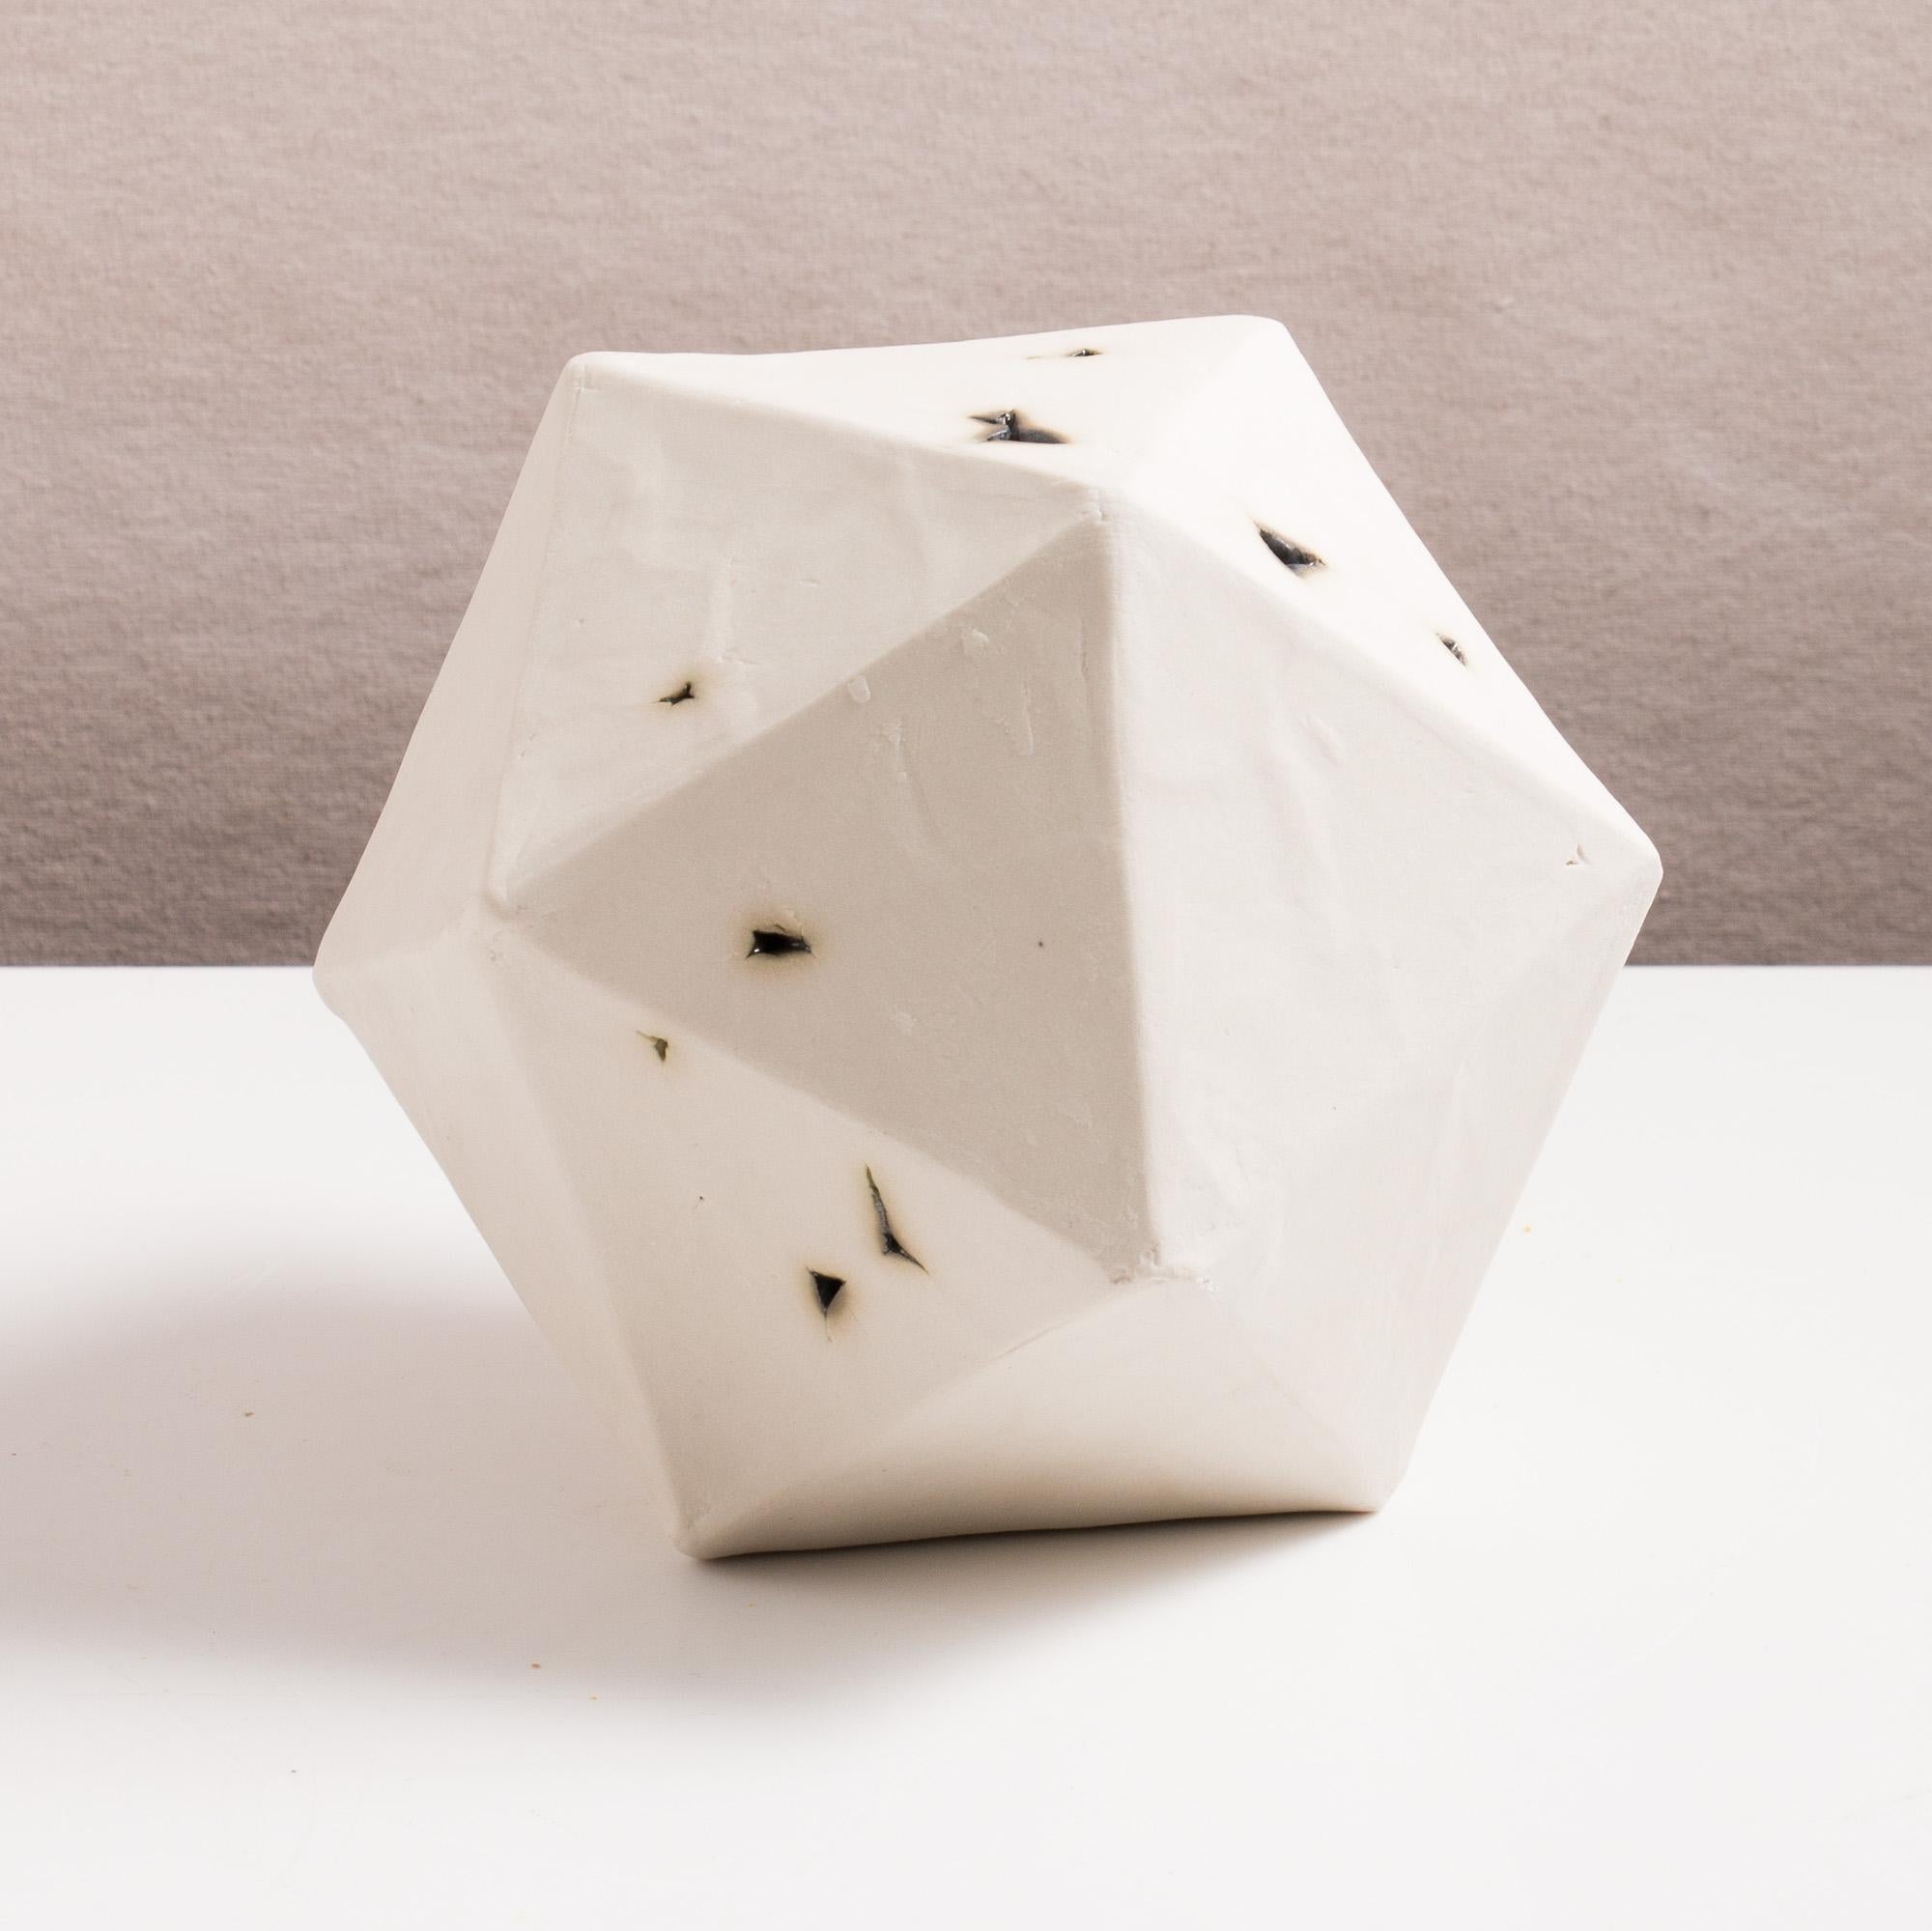 American Relic Icosahedron, Geometric White Porcelain Ceramic Small Sculptural Object